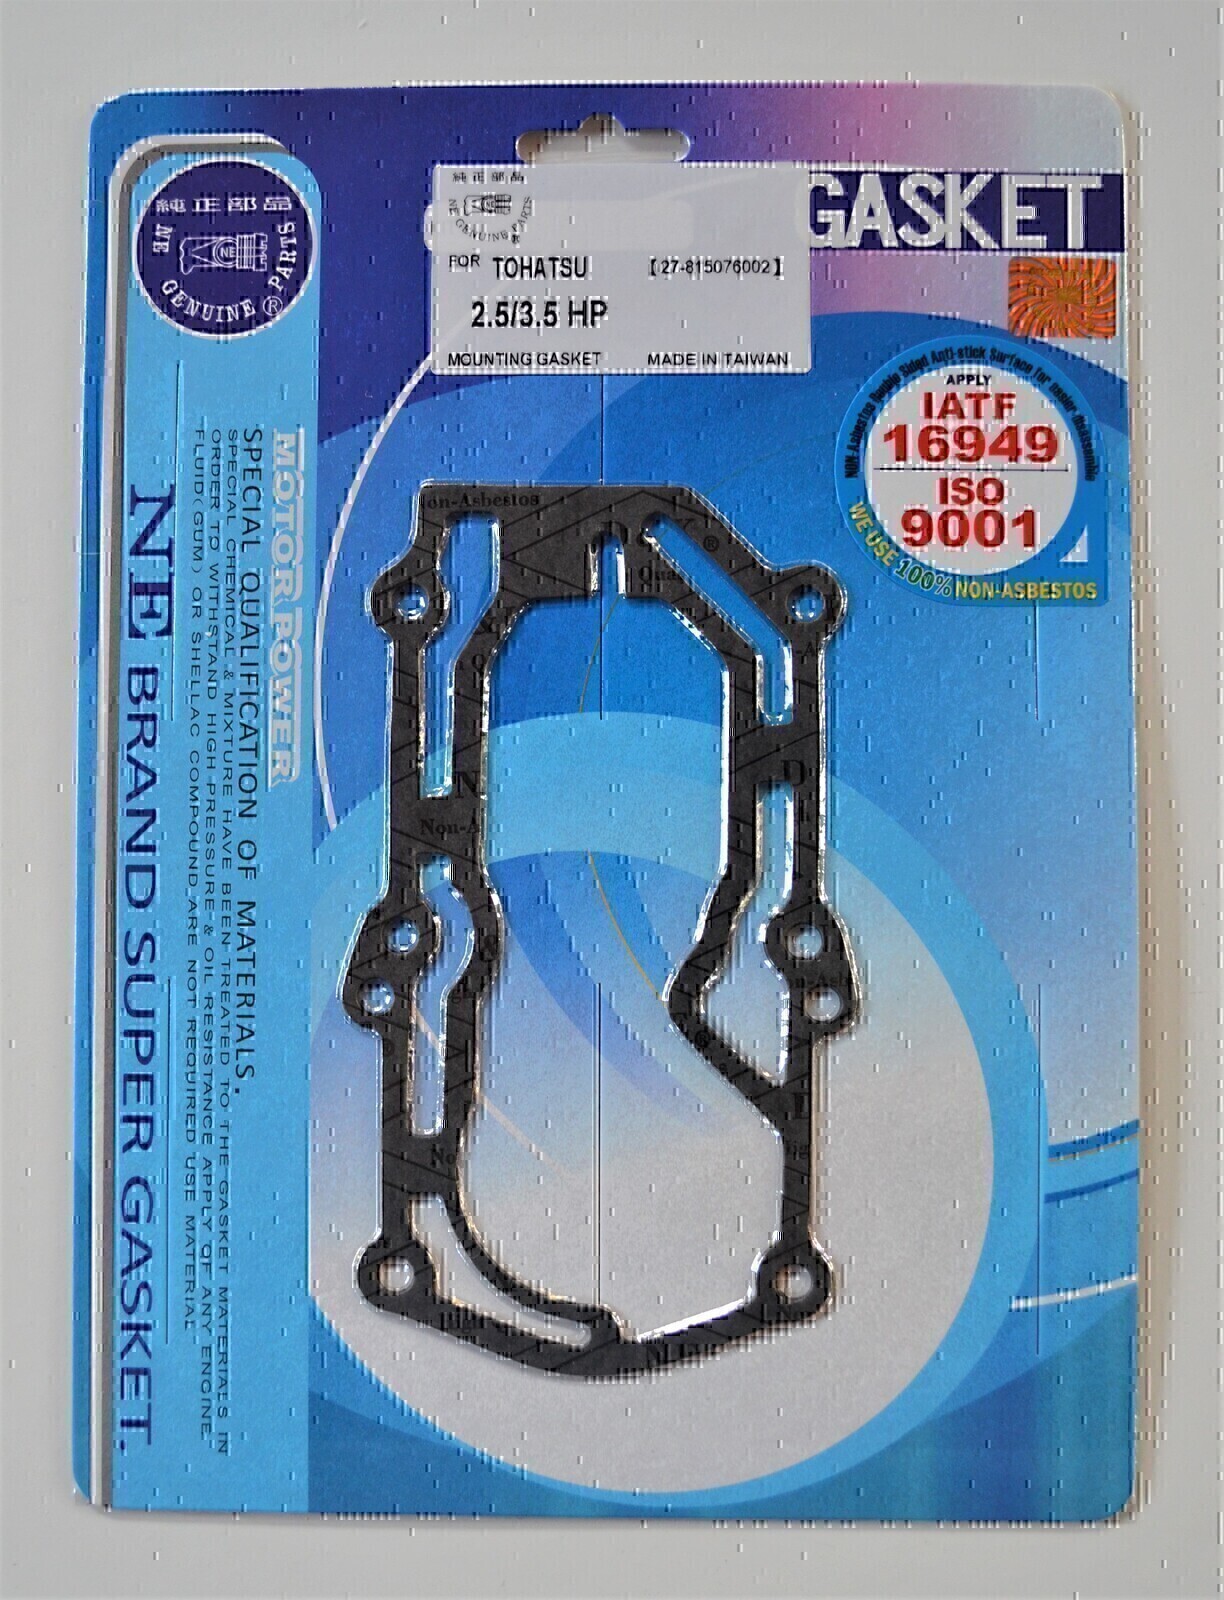 POWERHEAD MOUNTING GASKET FOR TOHATSU 2.5HP 3.5HP OUTBOARD MOTOR # 27-815076002